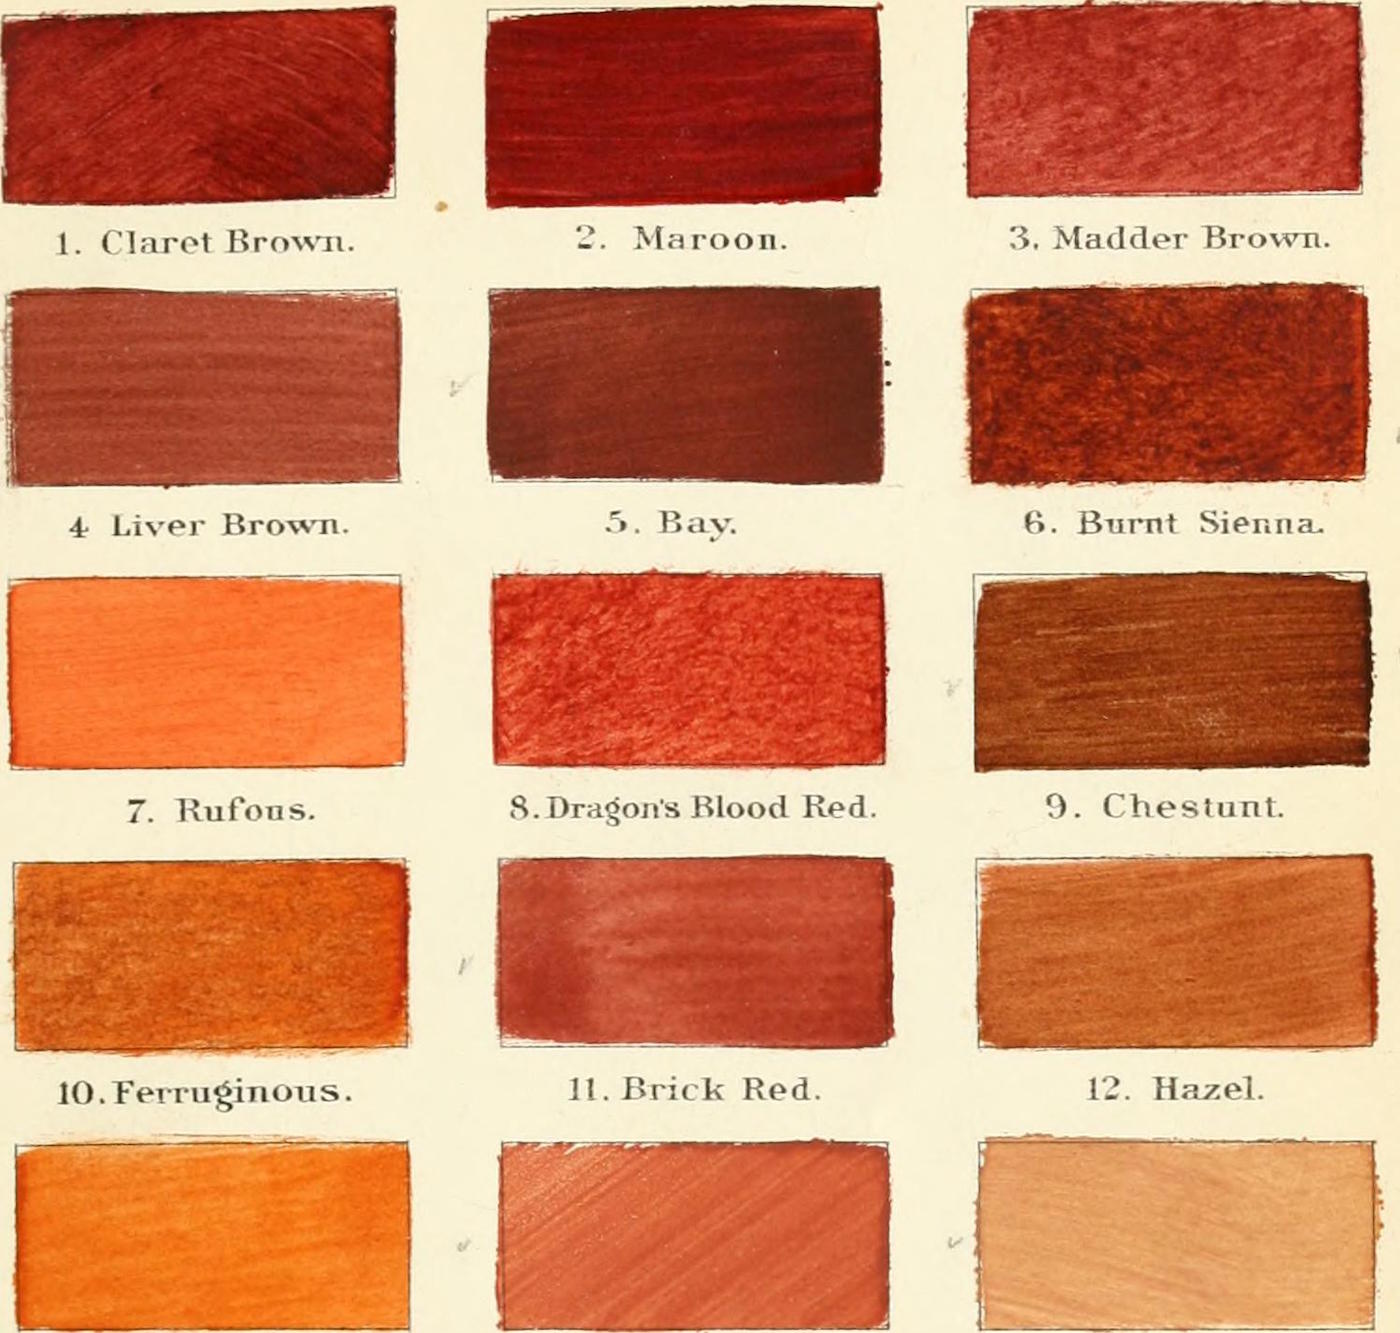 Colors from Robert Ridgway's "A Nomenclature of Colors for Naturalists : And Compendium of Useful Knowledge for Ornithologists." (1886) (via Boston Public Library/Wikimedia)